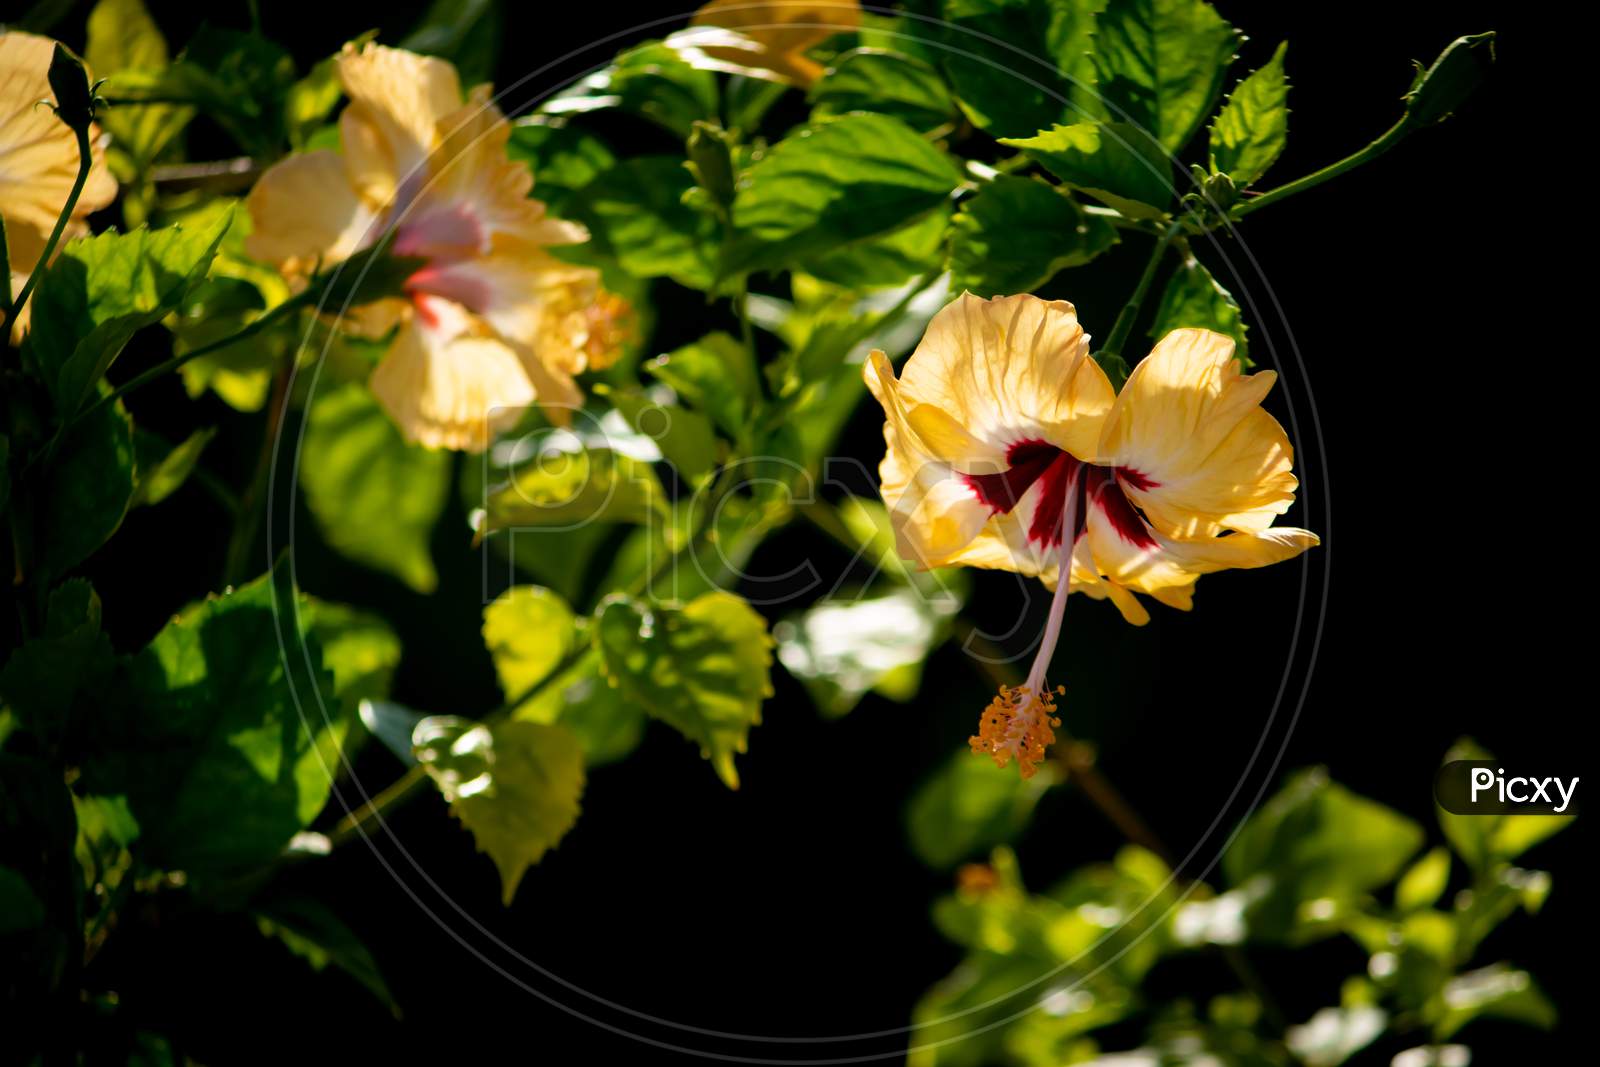 Yellwo Hibiscus Rosa-Sinensis, Colloquially As Chinese Hibiscus, China Rose, Hawaiian Hibiscus, Rose Mallow & Shoeblackplant, Is A Species Of Tropical Hibiscus, Hibisceae Tribe Of The Family Malvaceae